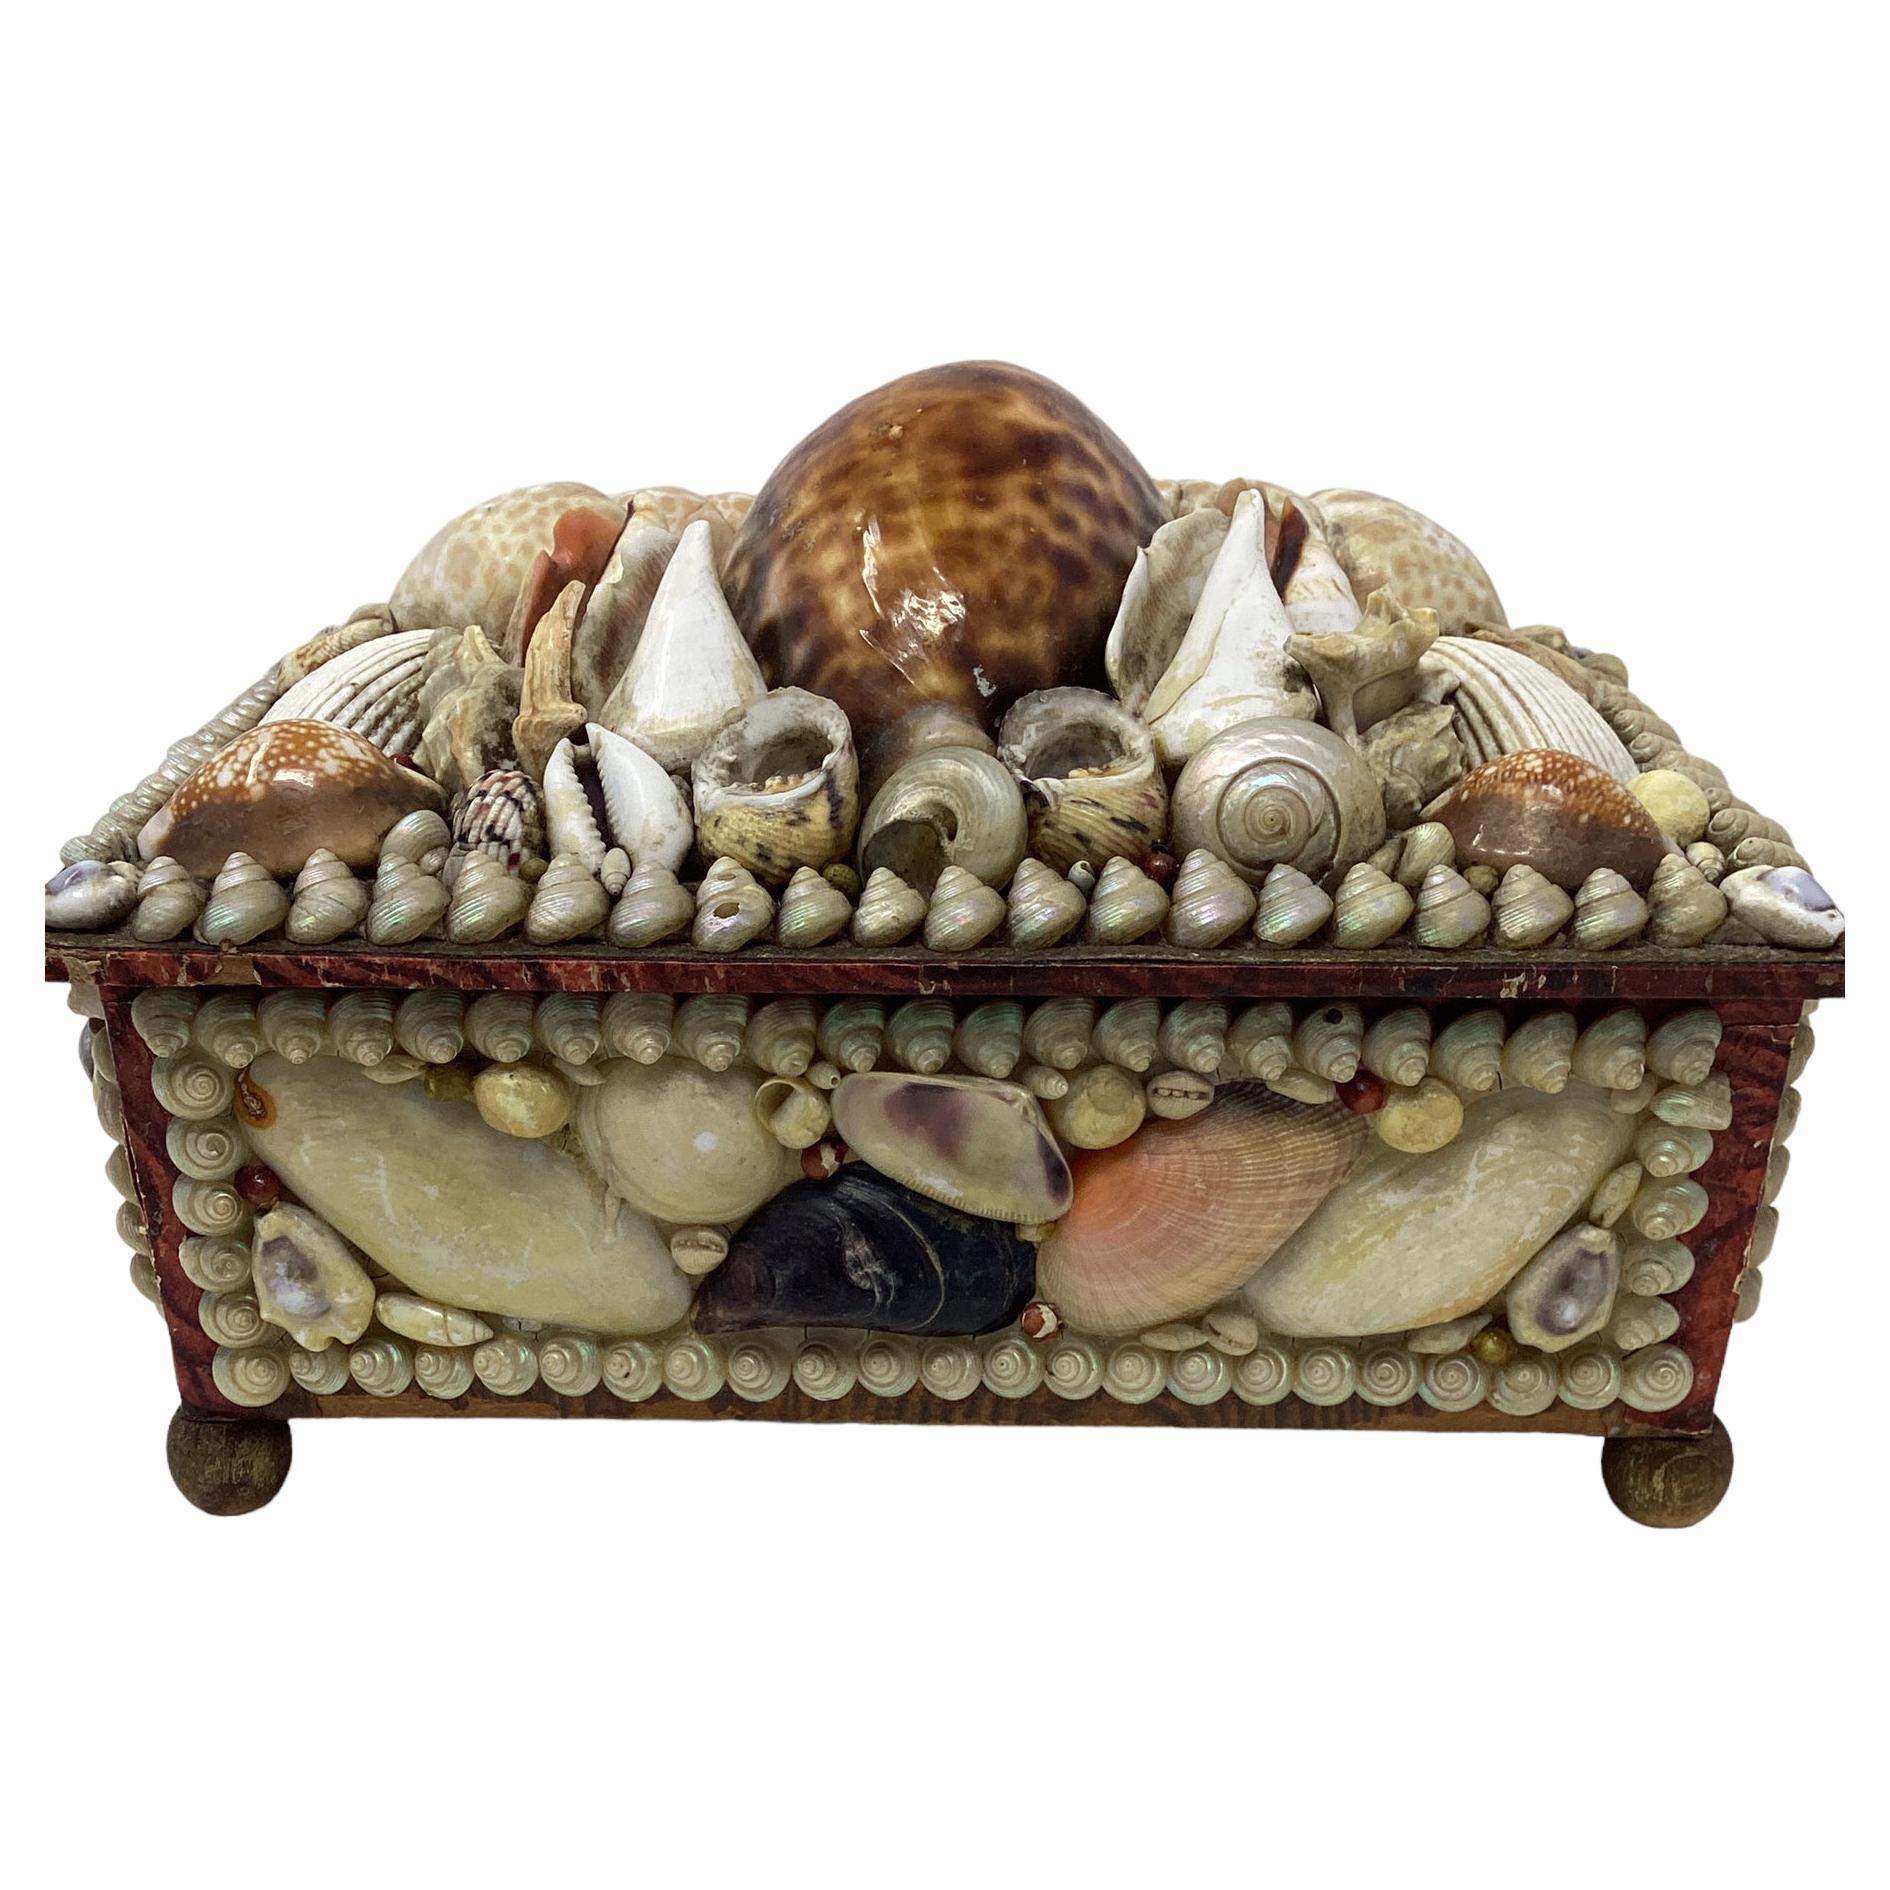 Antique Shell Encrusted Box For Sale at 1stDibs